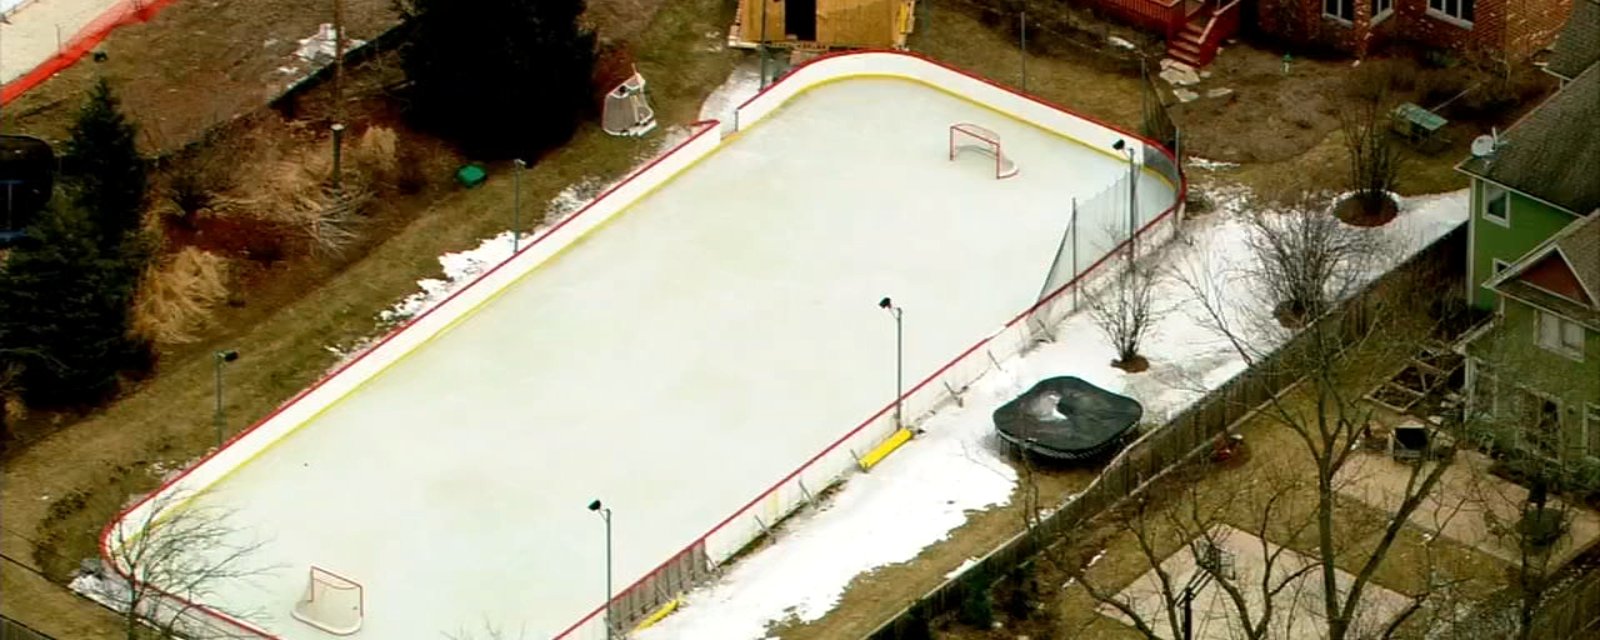 Hockey dad of the year builds backyard rink for the entire neighborhood!